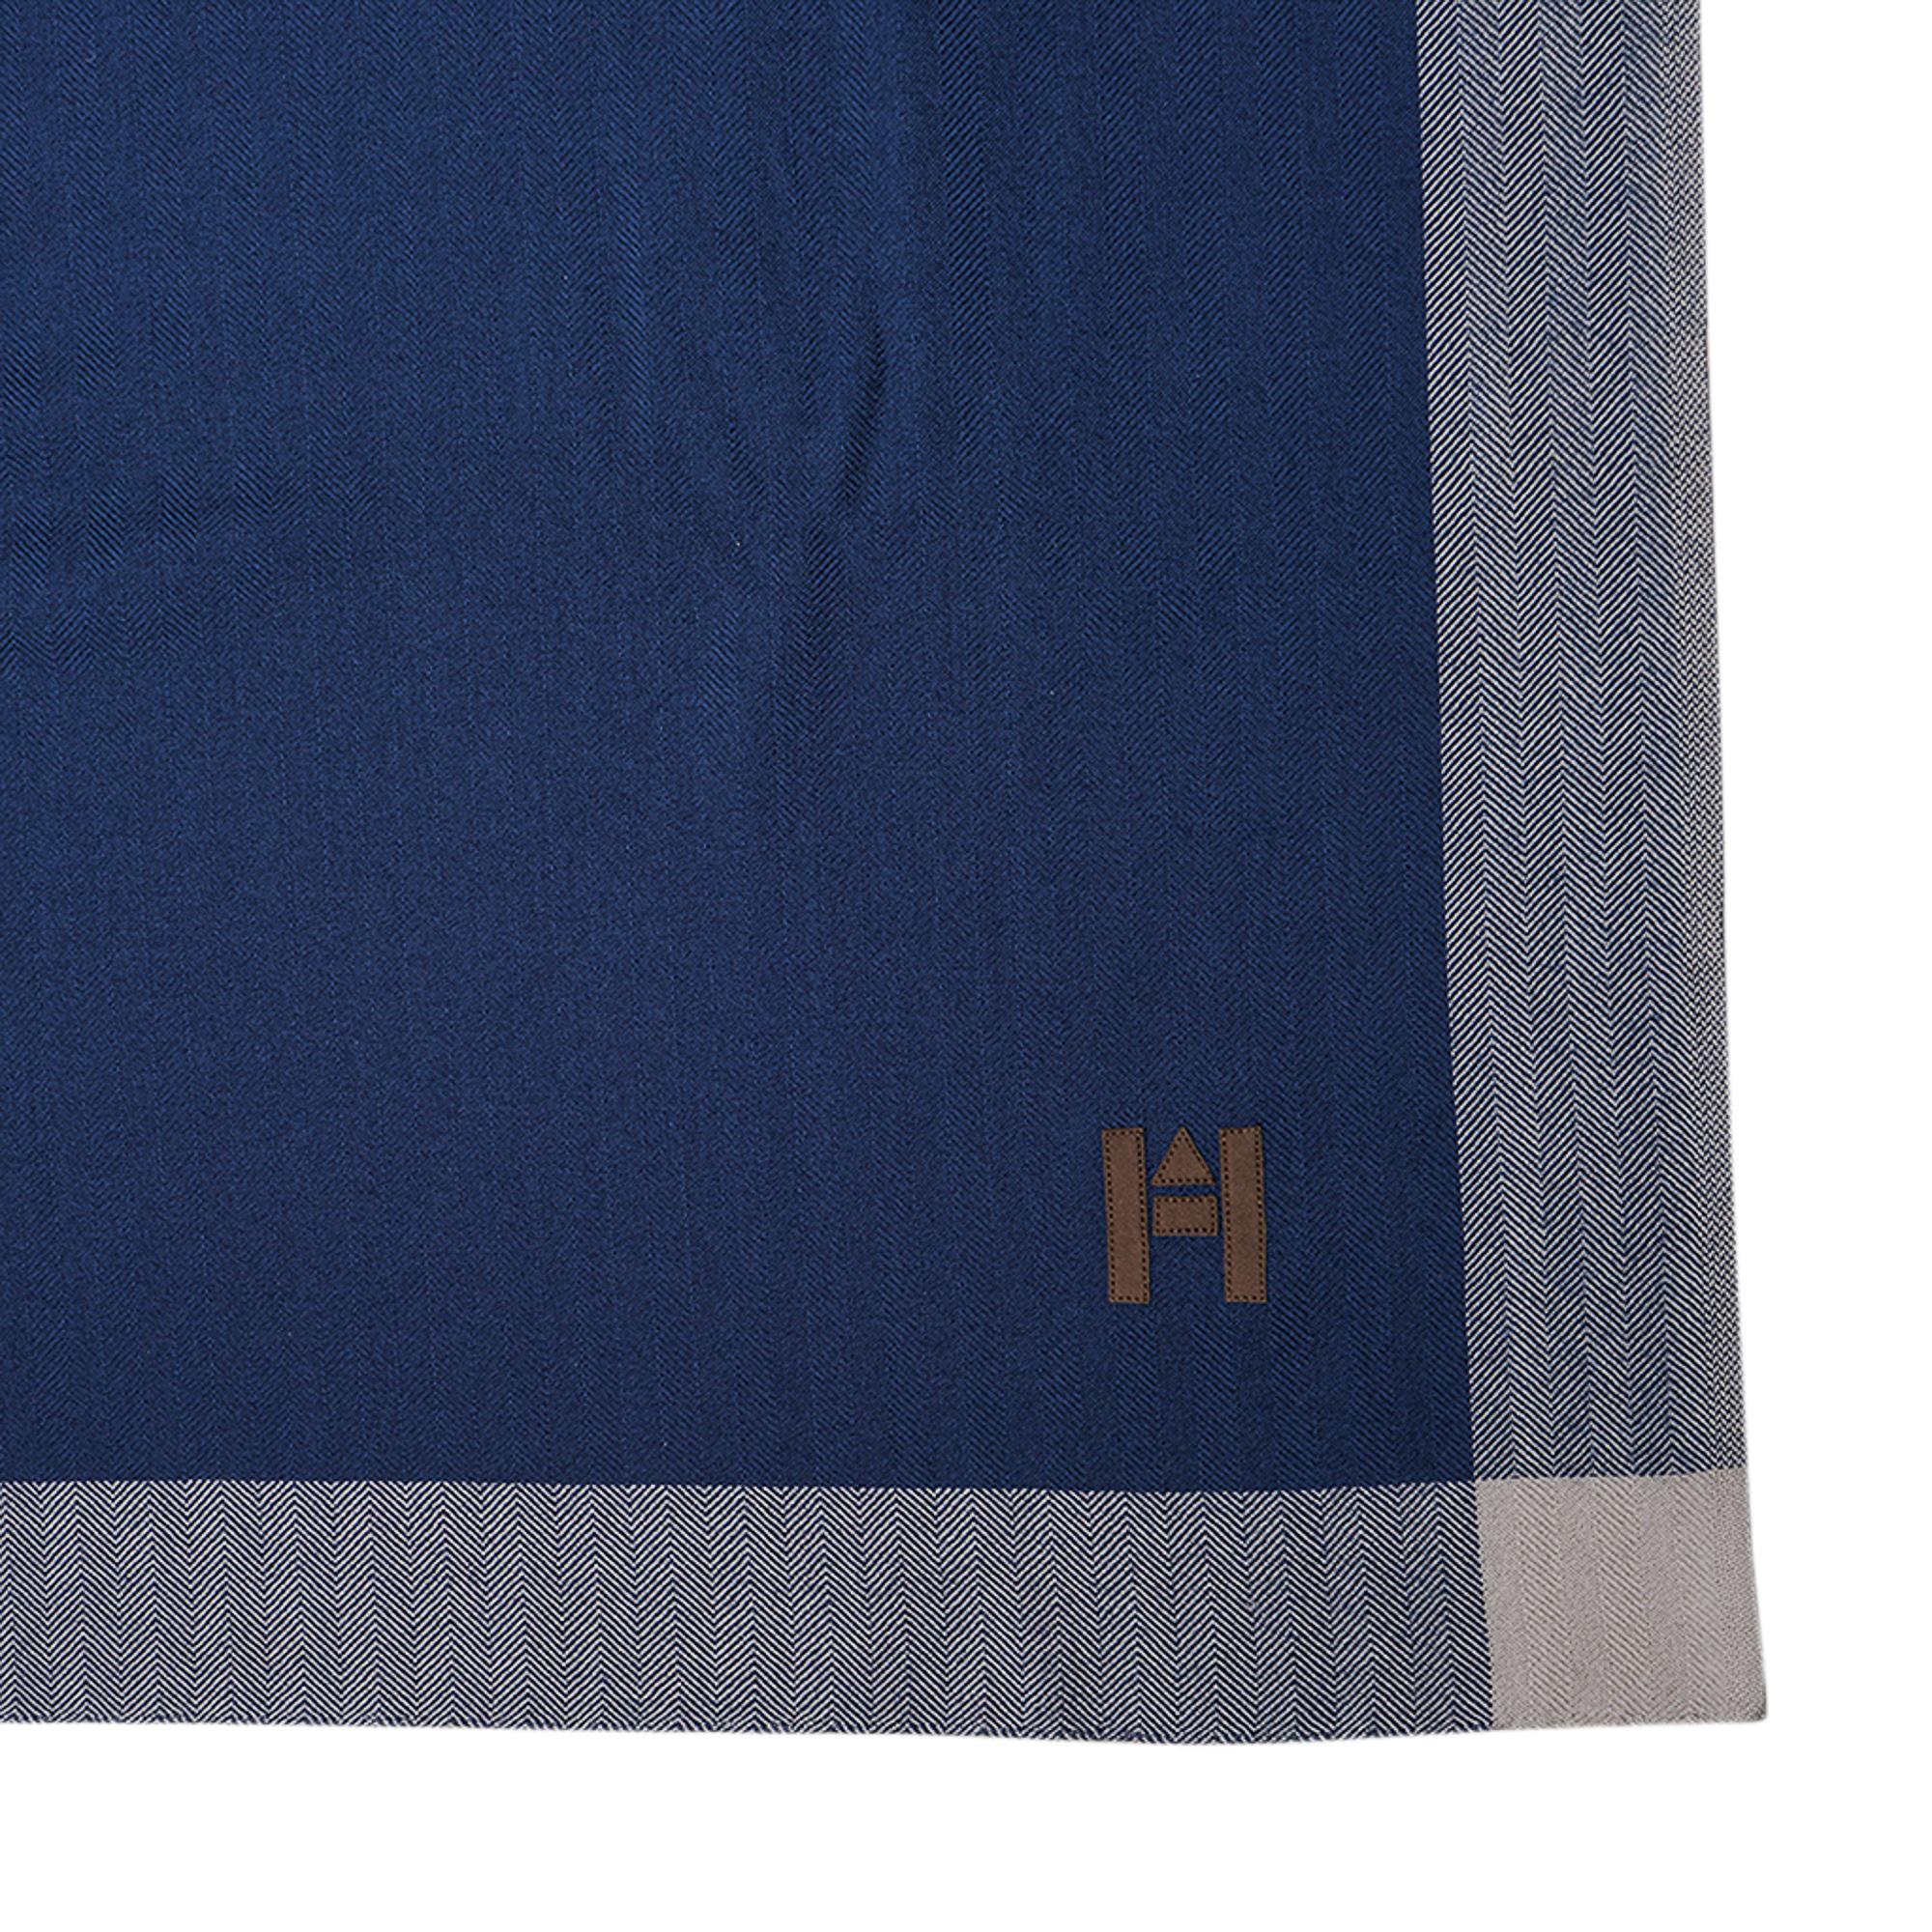 Mightychic offers a rare limited edition Hermes Traveler Blanket and Case featured in Blue and Cream cashmere.
Rectangular in shape.
Blanket and case have an H detail in Brown leather.
Blue and Cream herringbone trim.
The ultimate travel luxury.
New